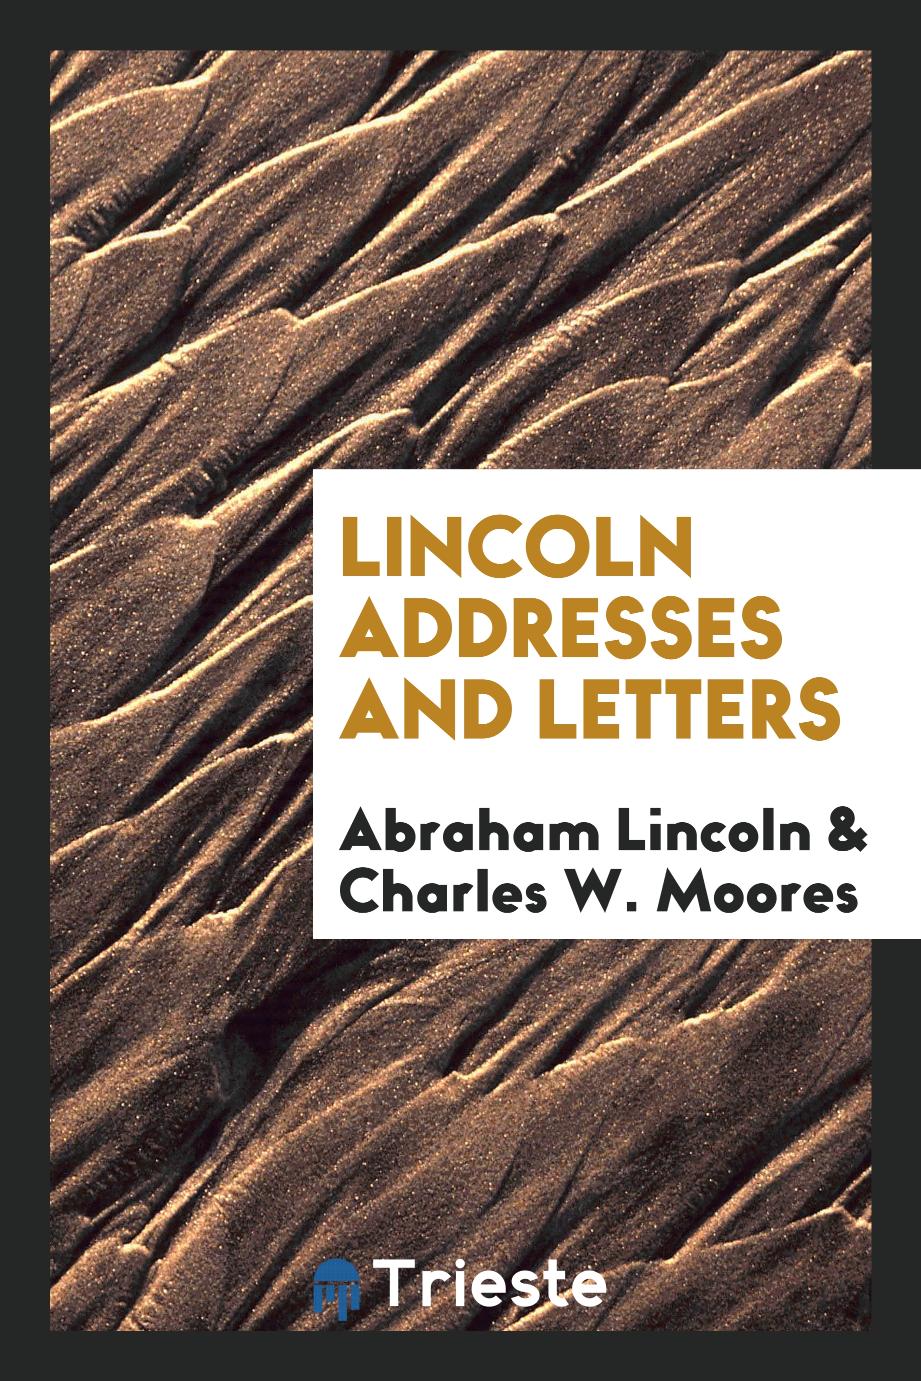 Lincoln addresses and letters